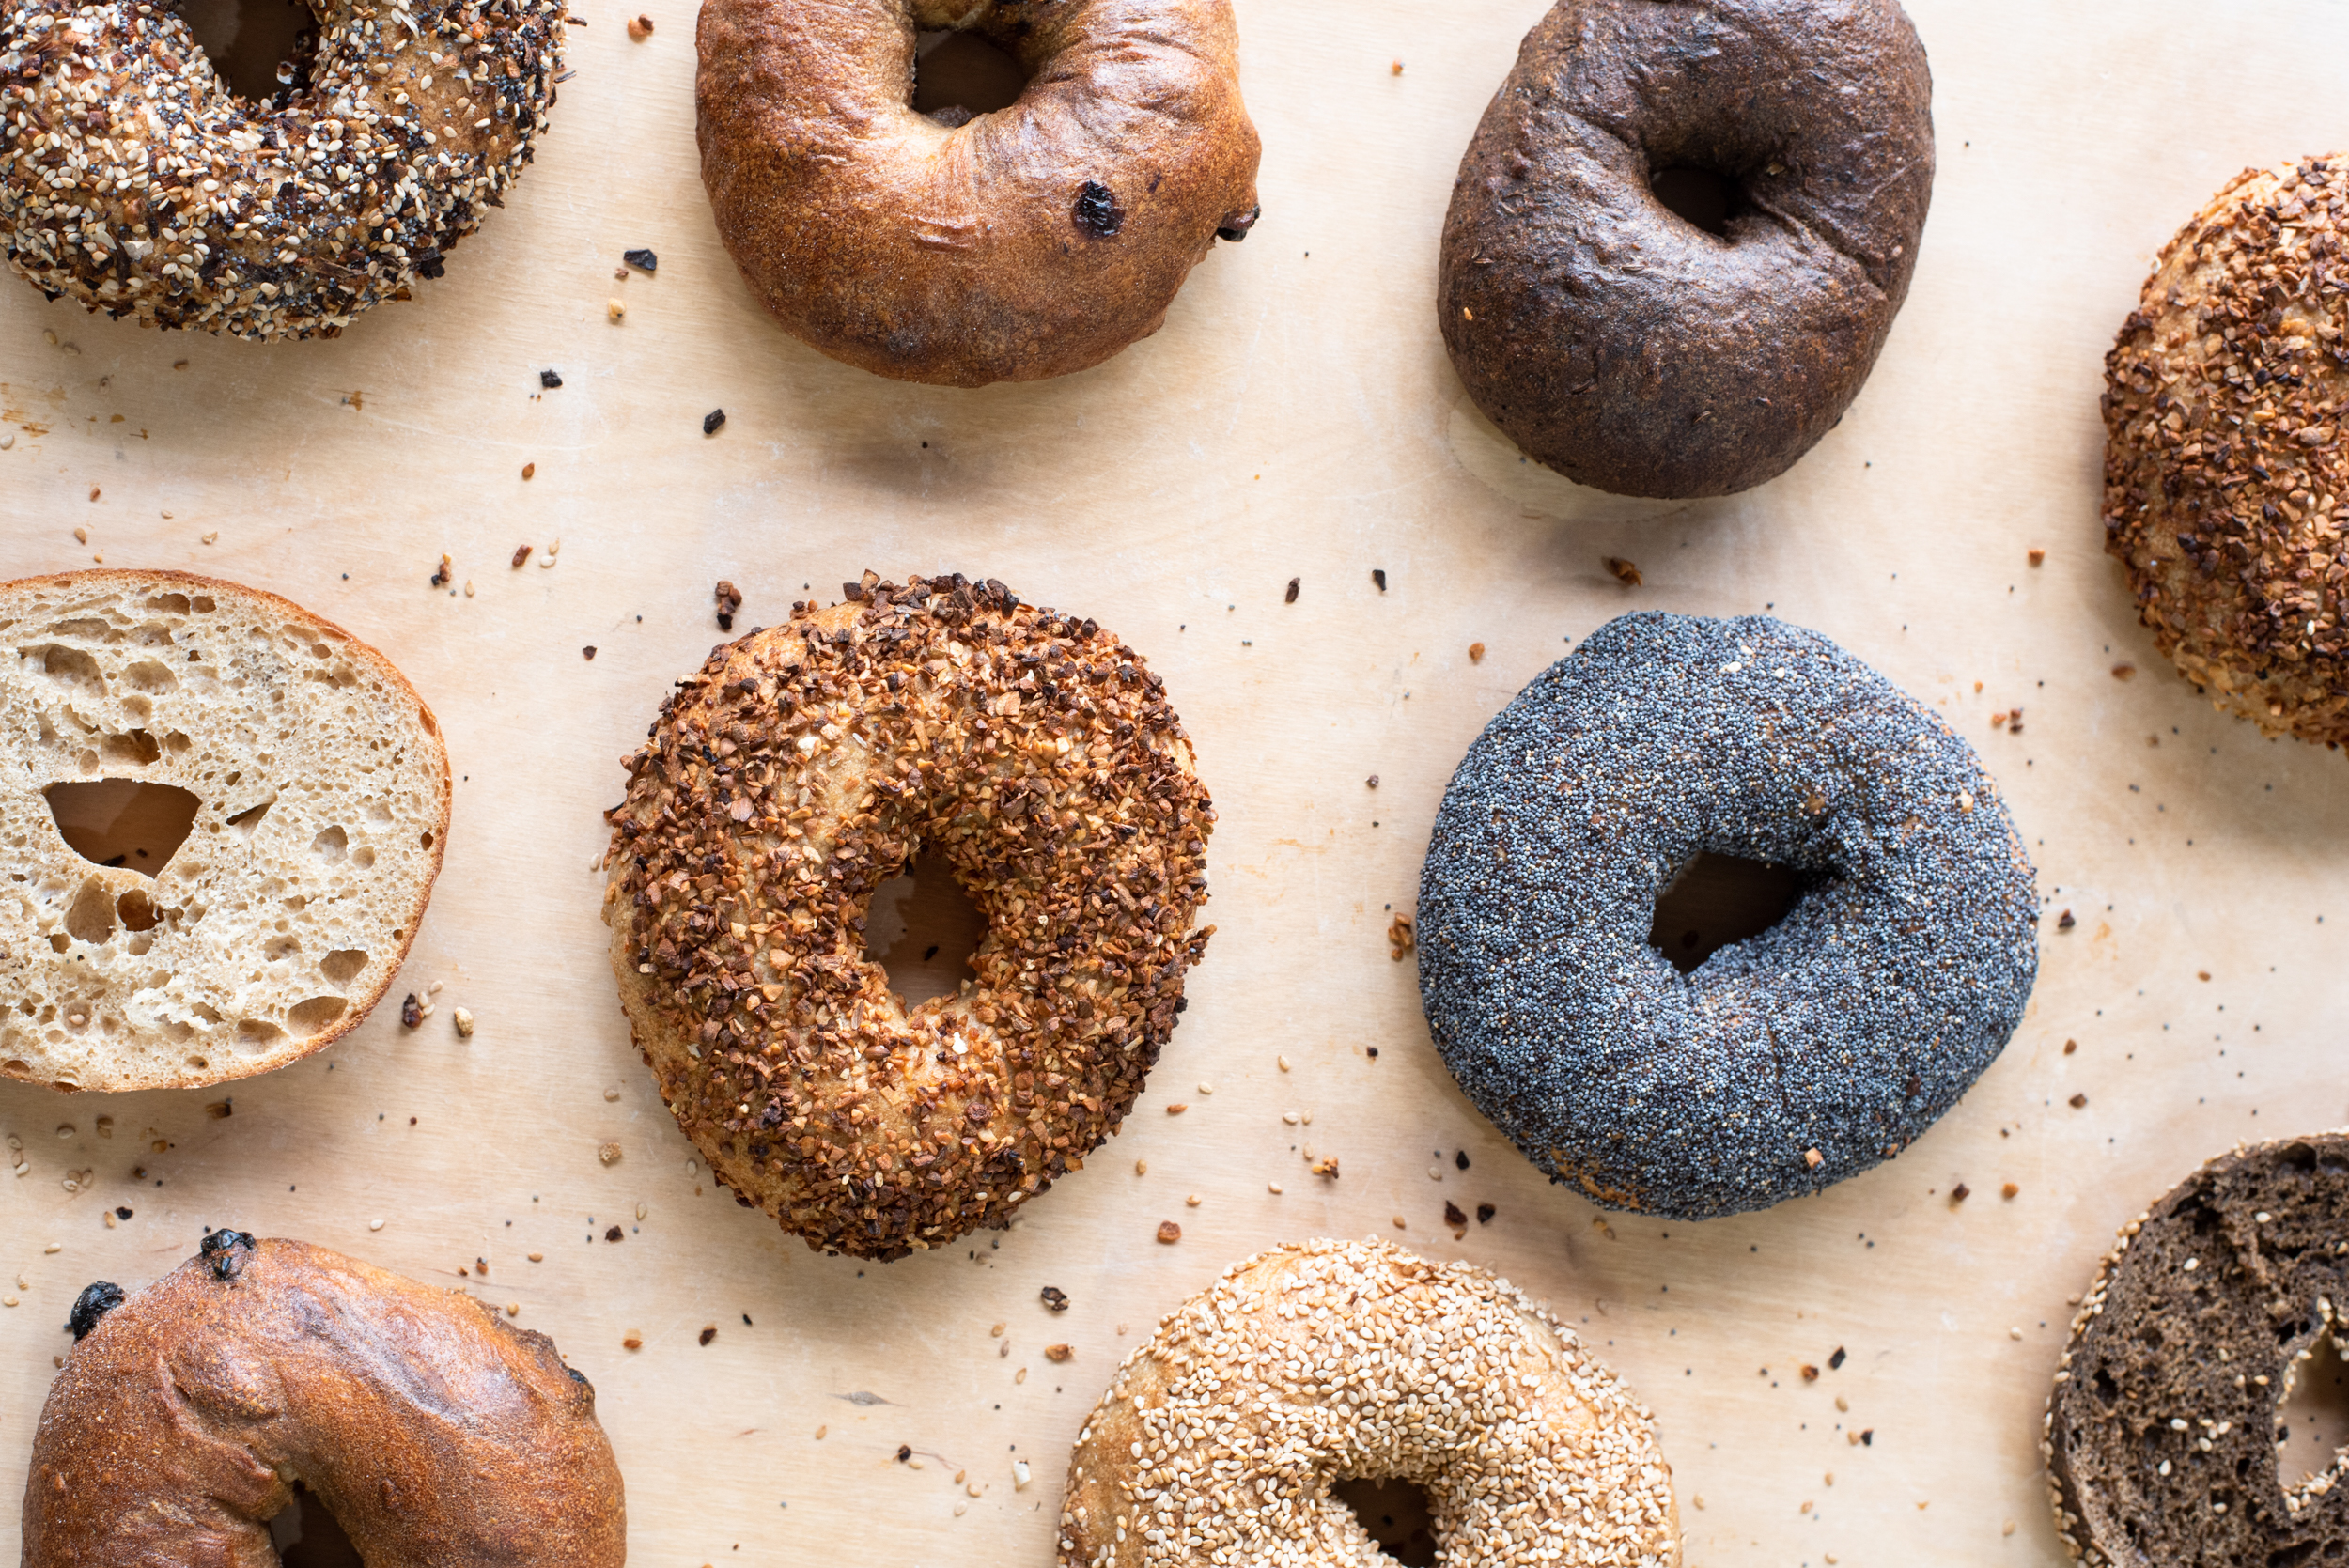 Midnite Bagel feels right at home in its new Sunset District brick-and-mortar location